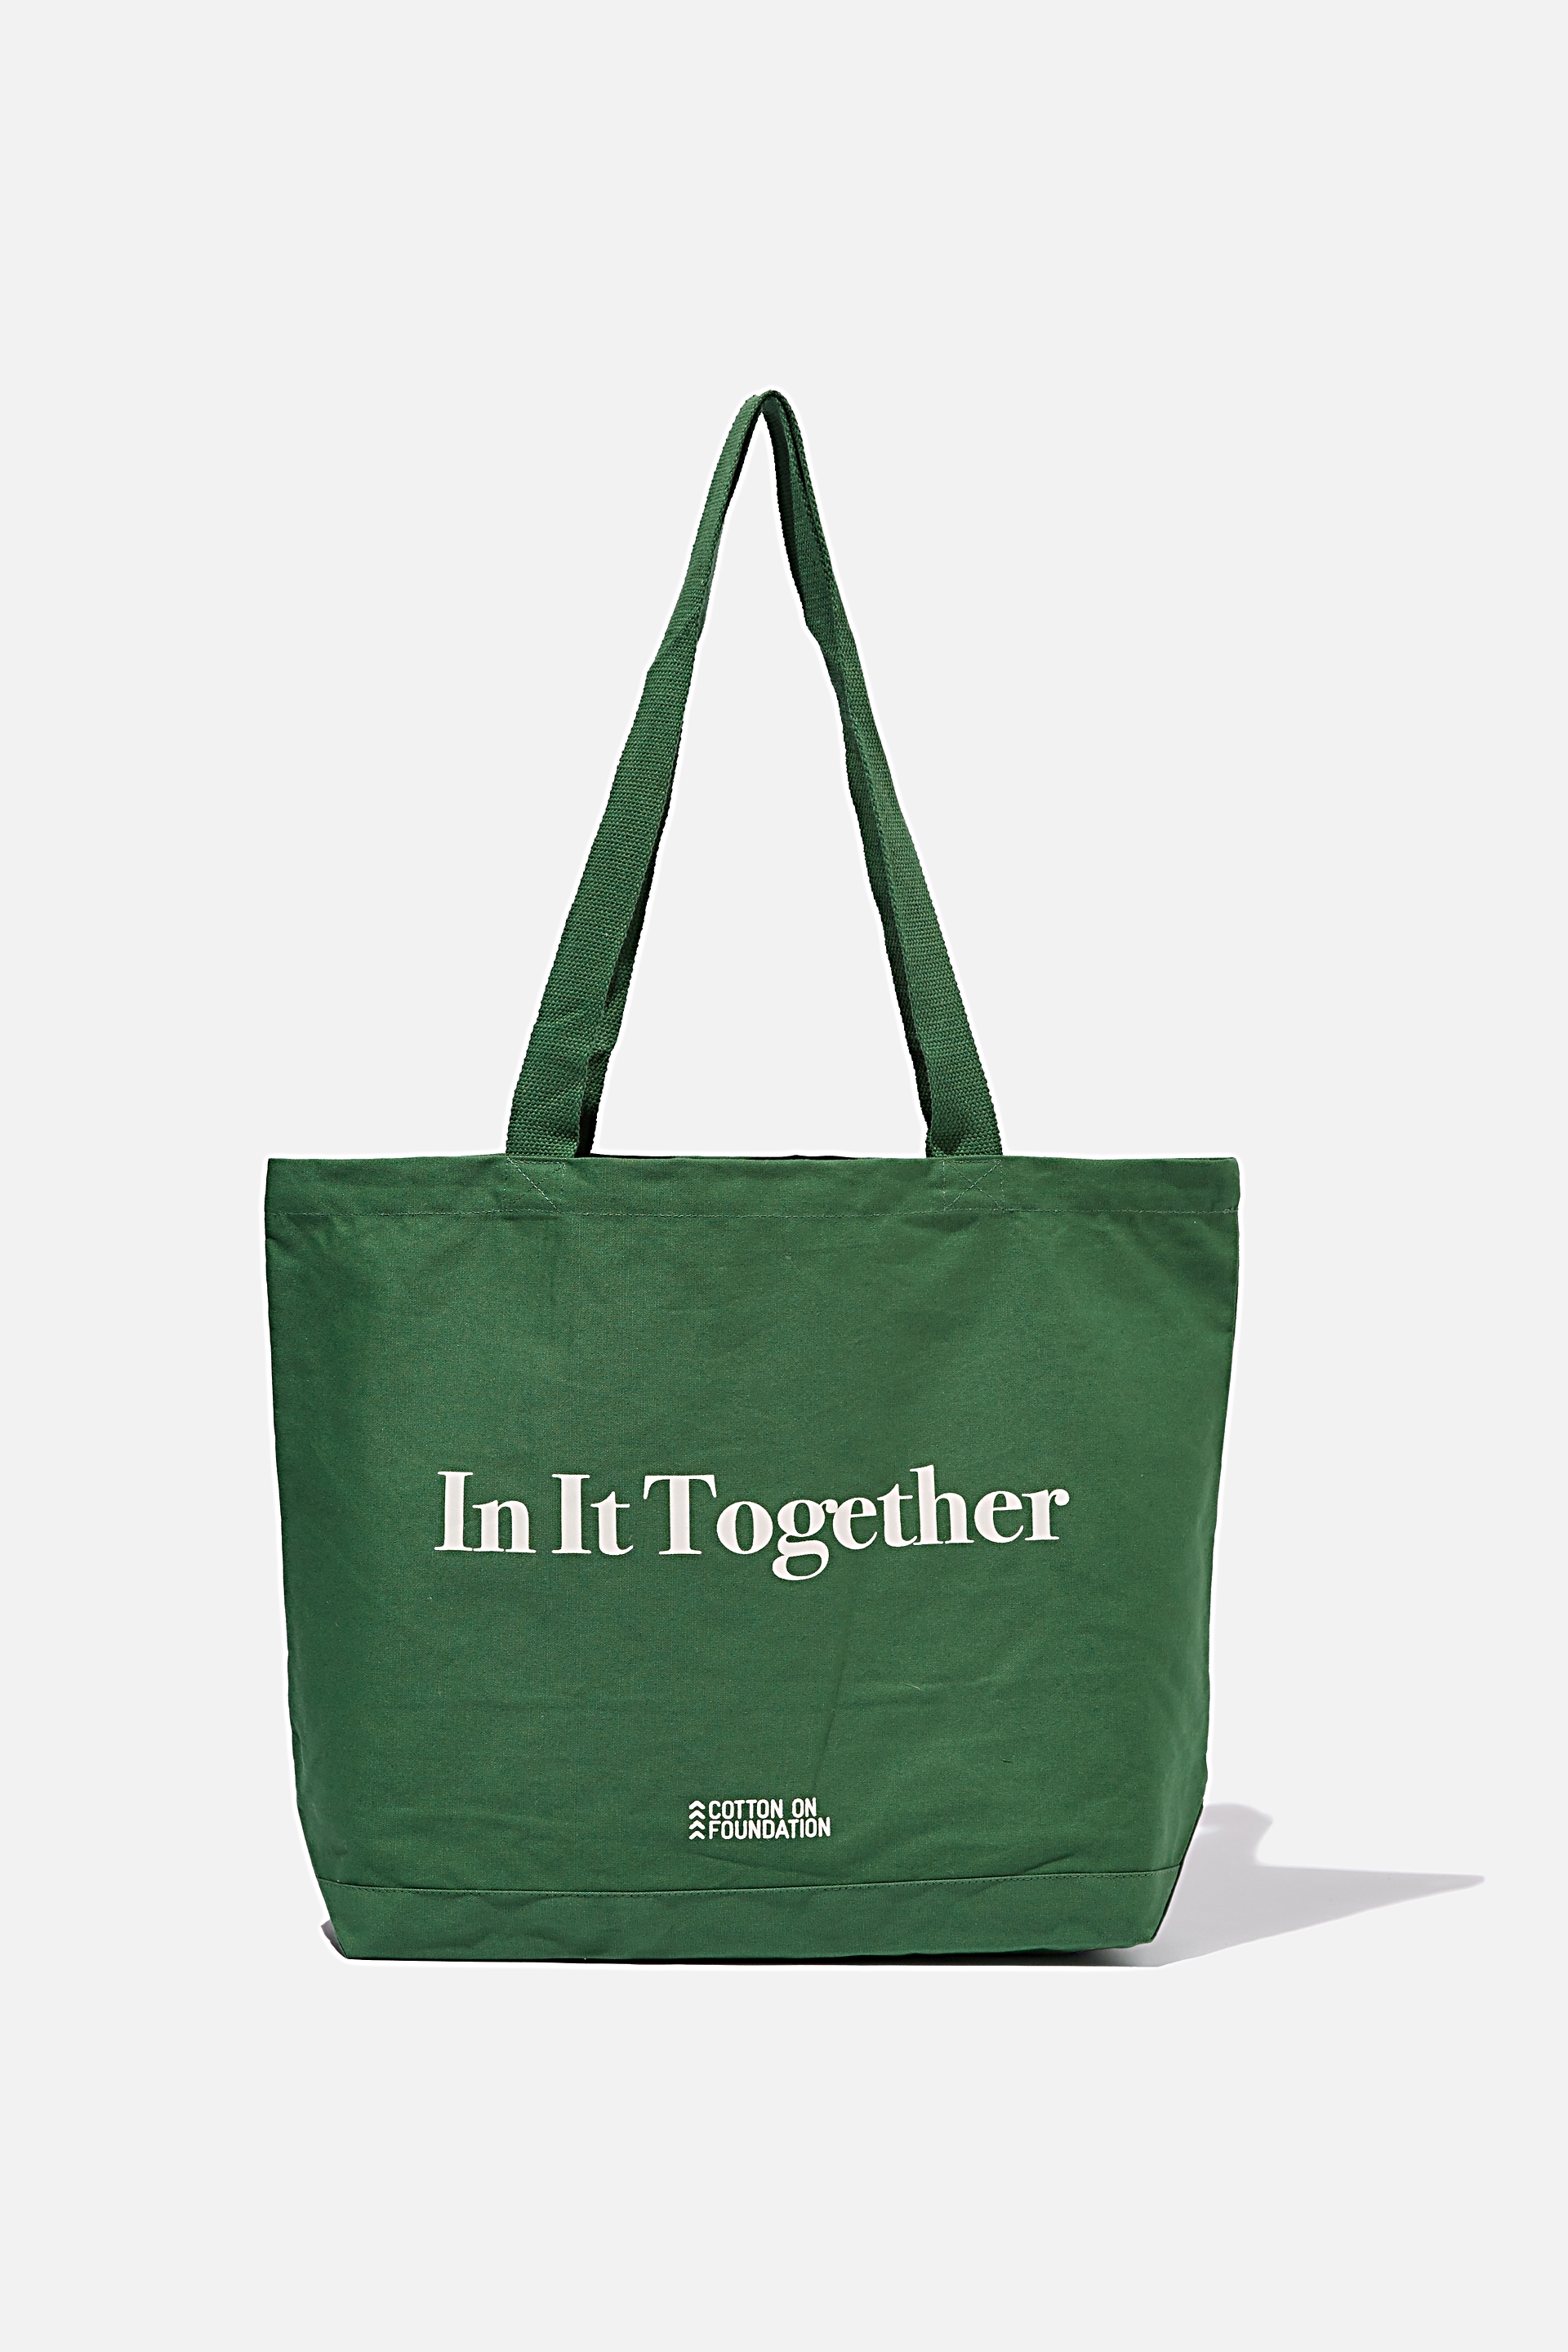 Cotton On Foundation - Foundation Exclusive Tote Bag - In it together/heritage green